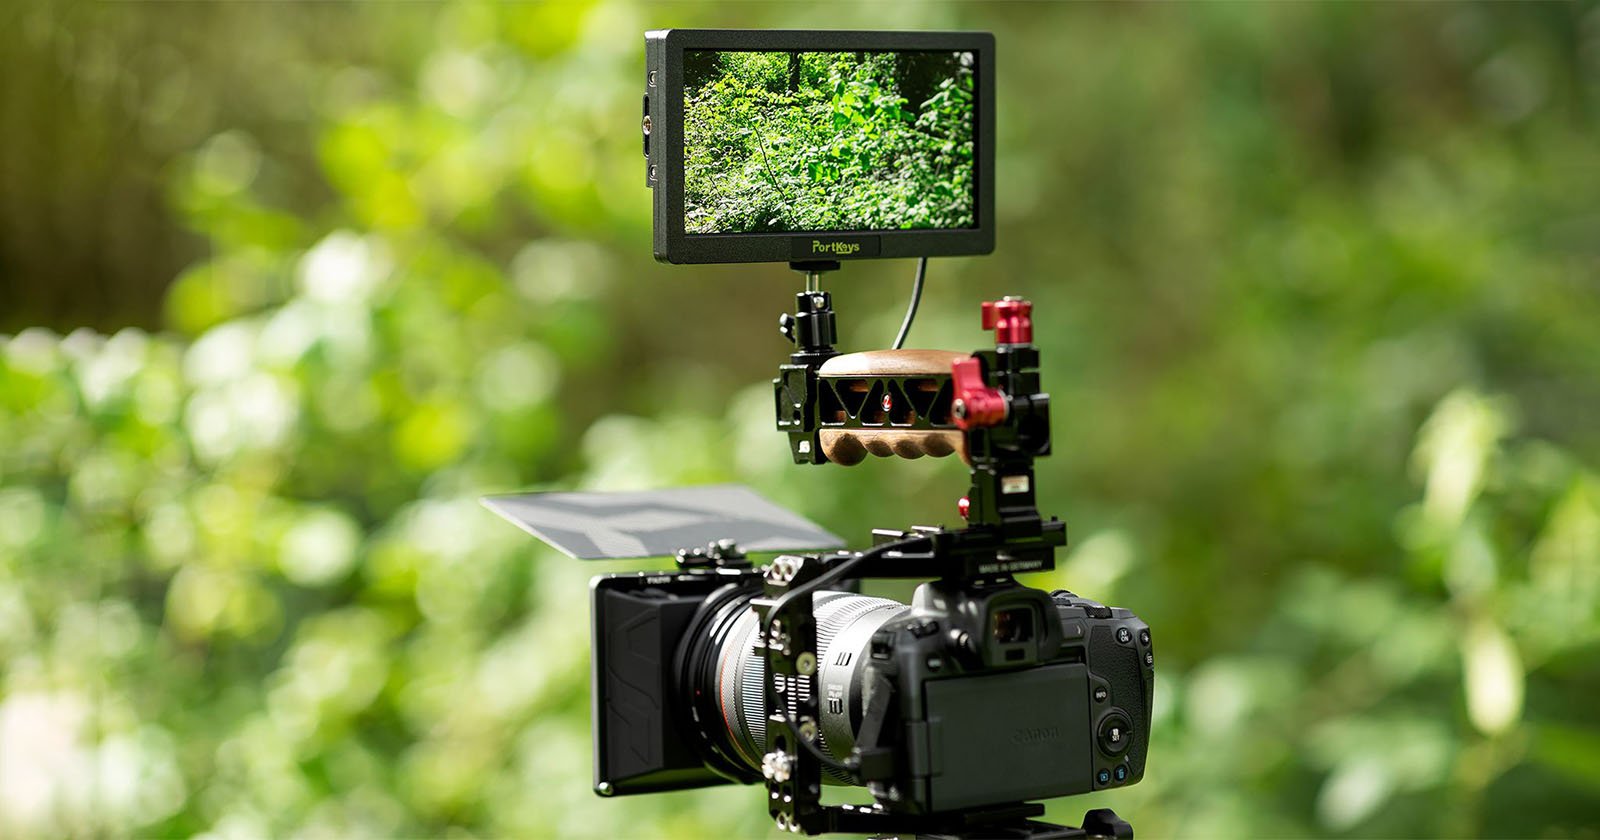 A DSLR camera mounted on a tripod in an outdoor setting. Attached to the camera is a field monitor displaying the camera's view of lush green foliage in the background. The setup appears to be for professional videography or photography.